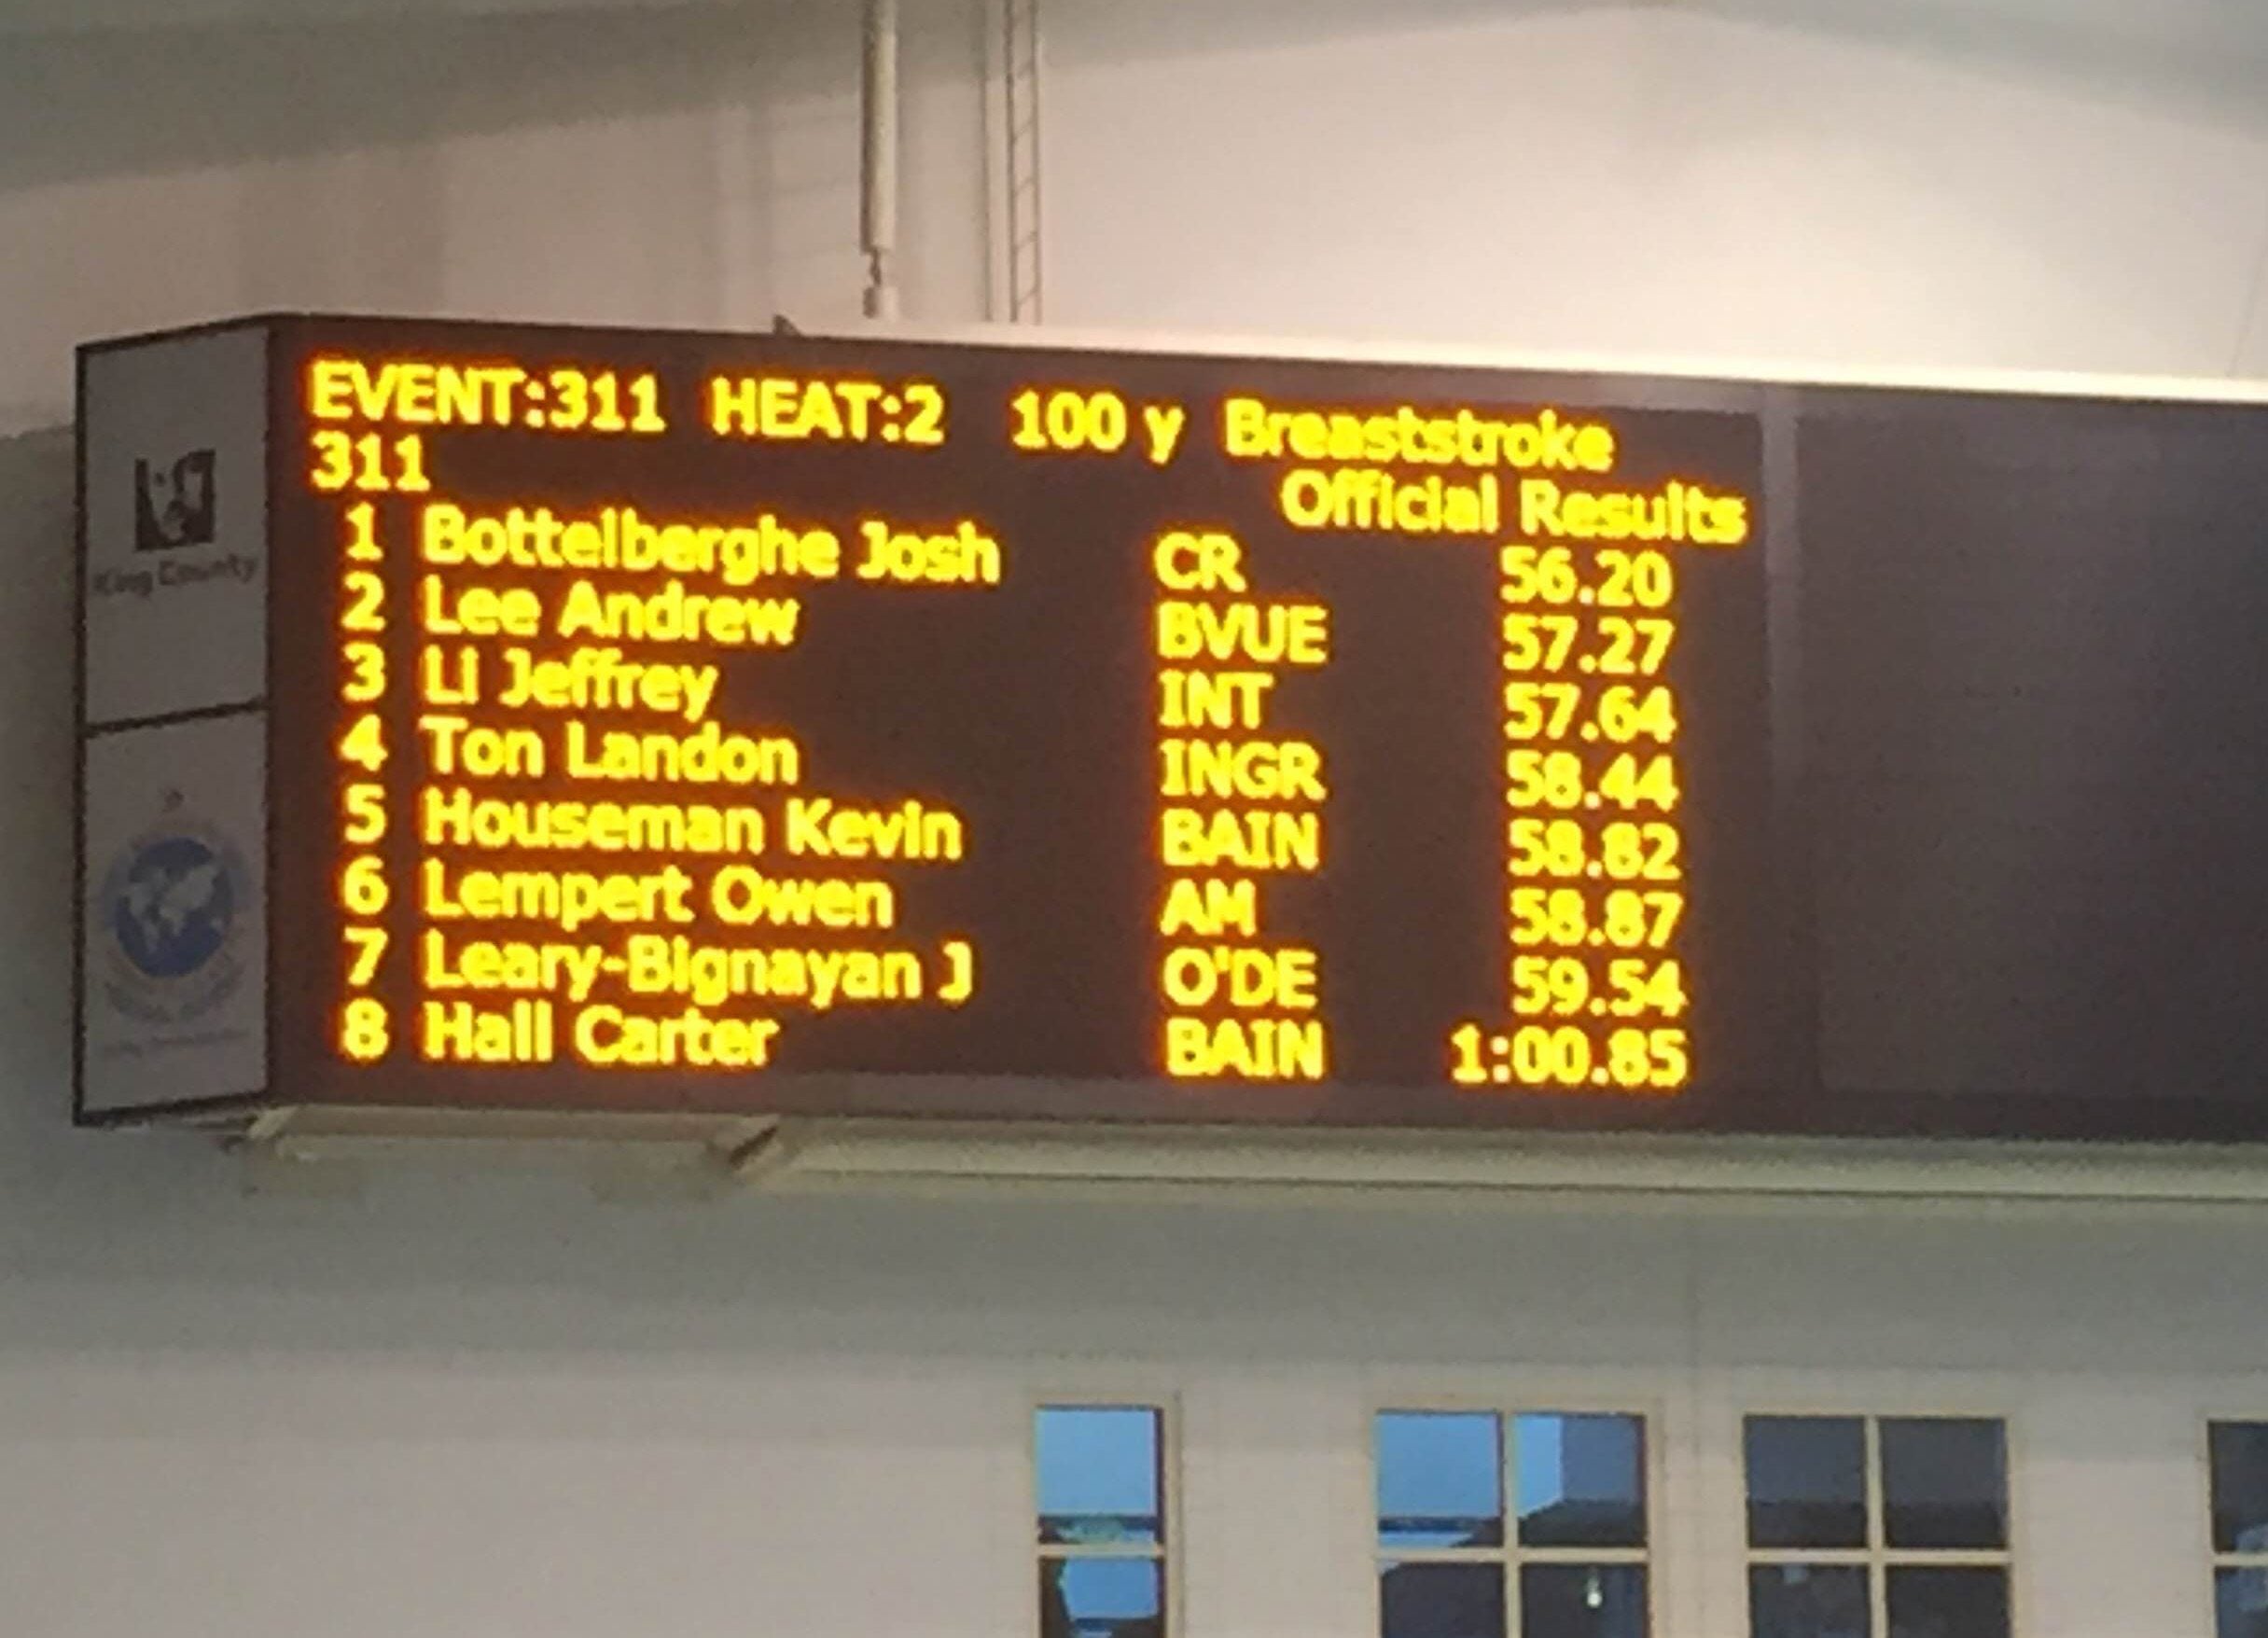 The scoreboard at the King County Aquatic Center in Federal Way shows Columbia River's Josh Bottelberghe as the 3A state champ of the 100-yard breaststroke.